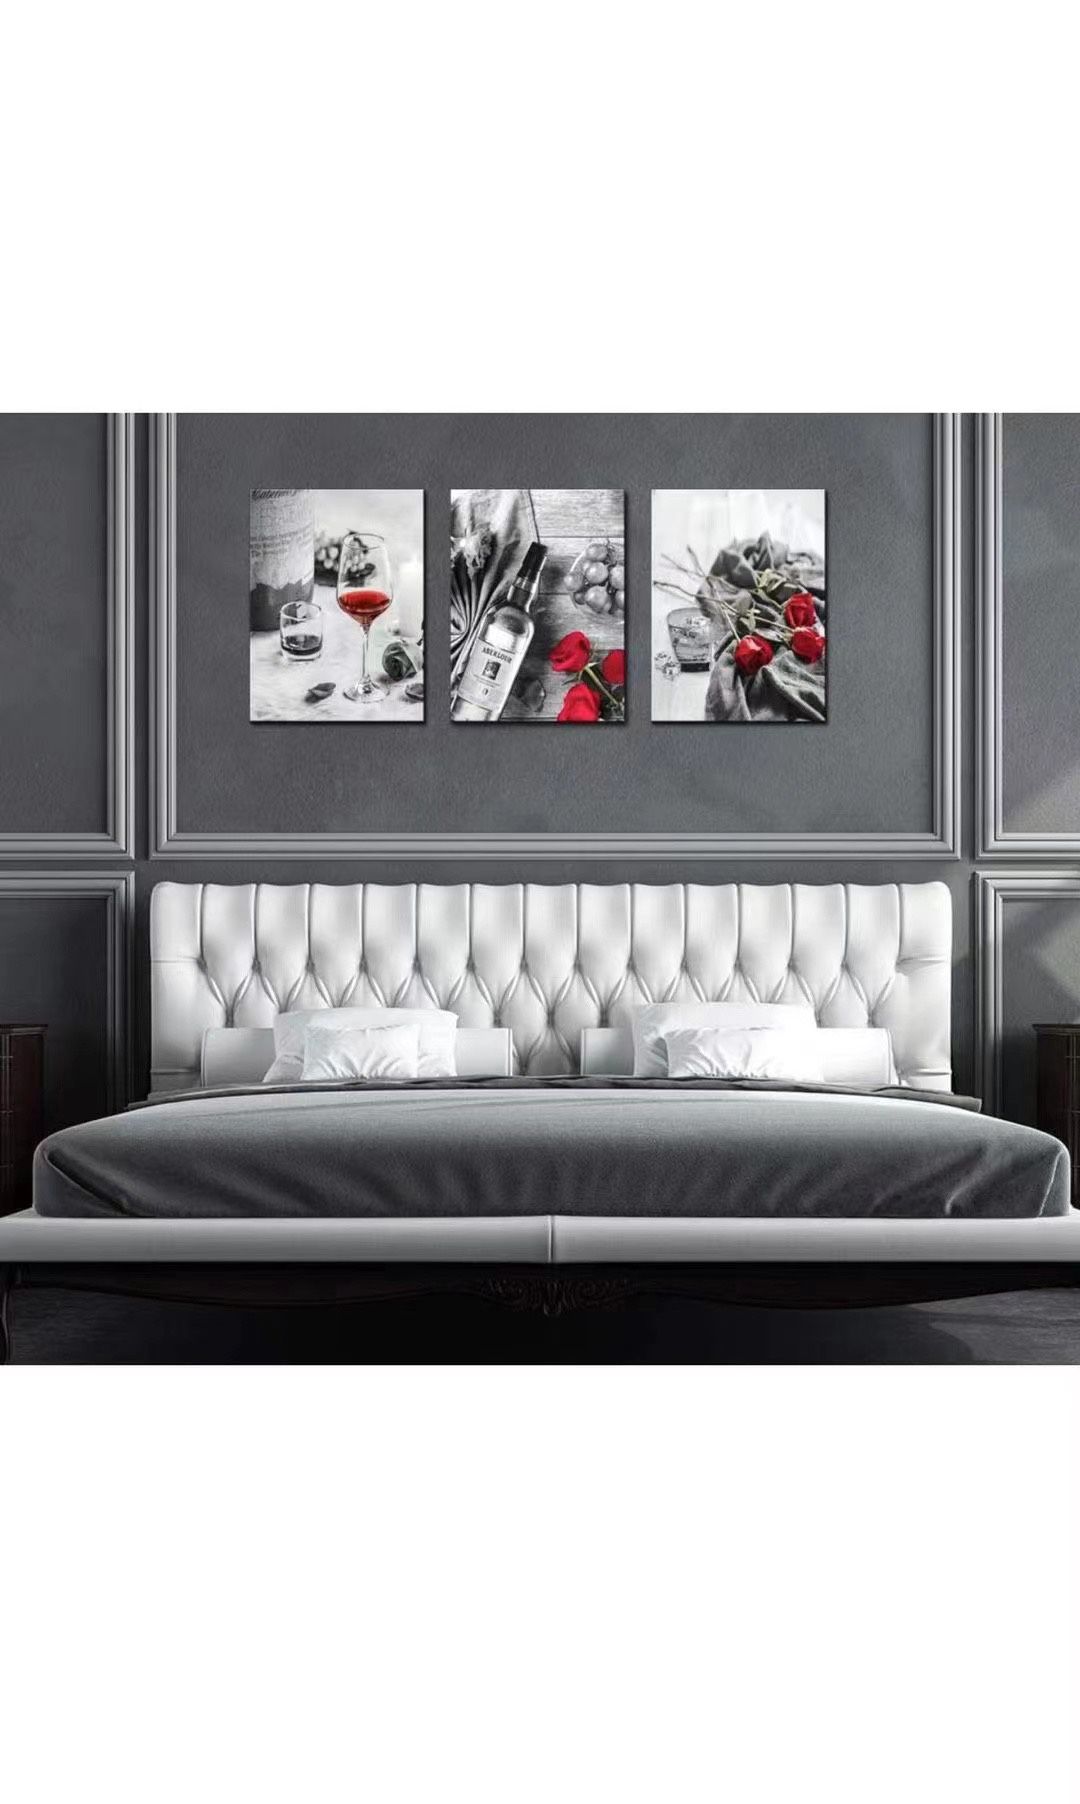 Canvas Wall Art Decor Wine Painting Artwork Poster Red Wine In Cups With Ice Rose Black White Canvas Wall Art Print Framed Pictures Red Rose Poster Gi